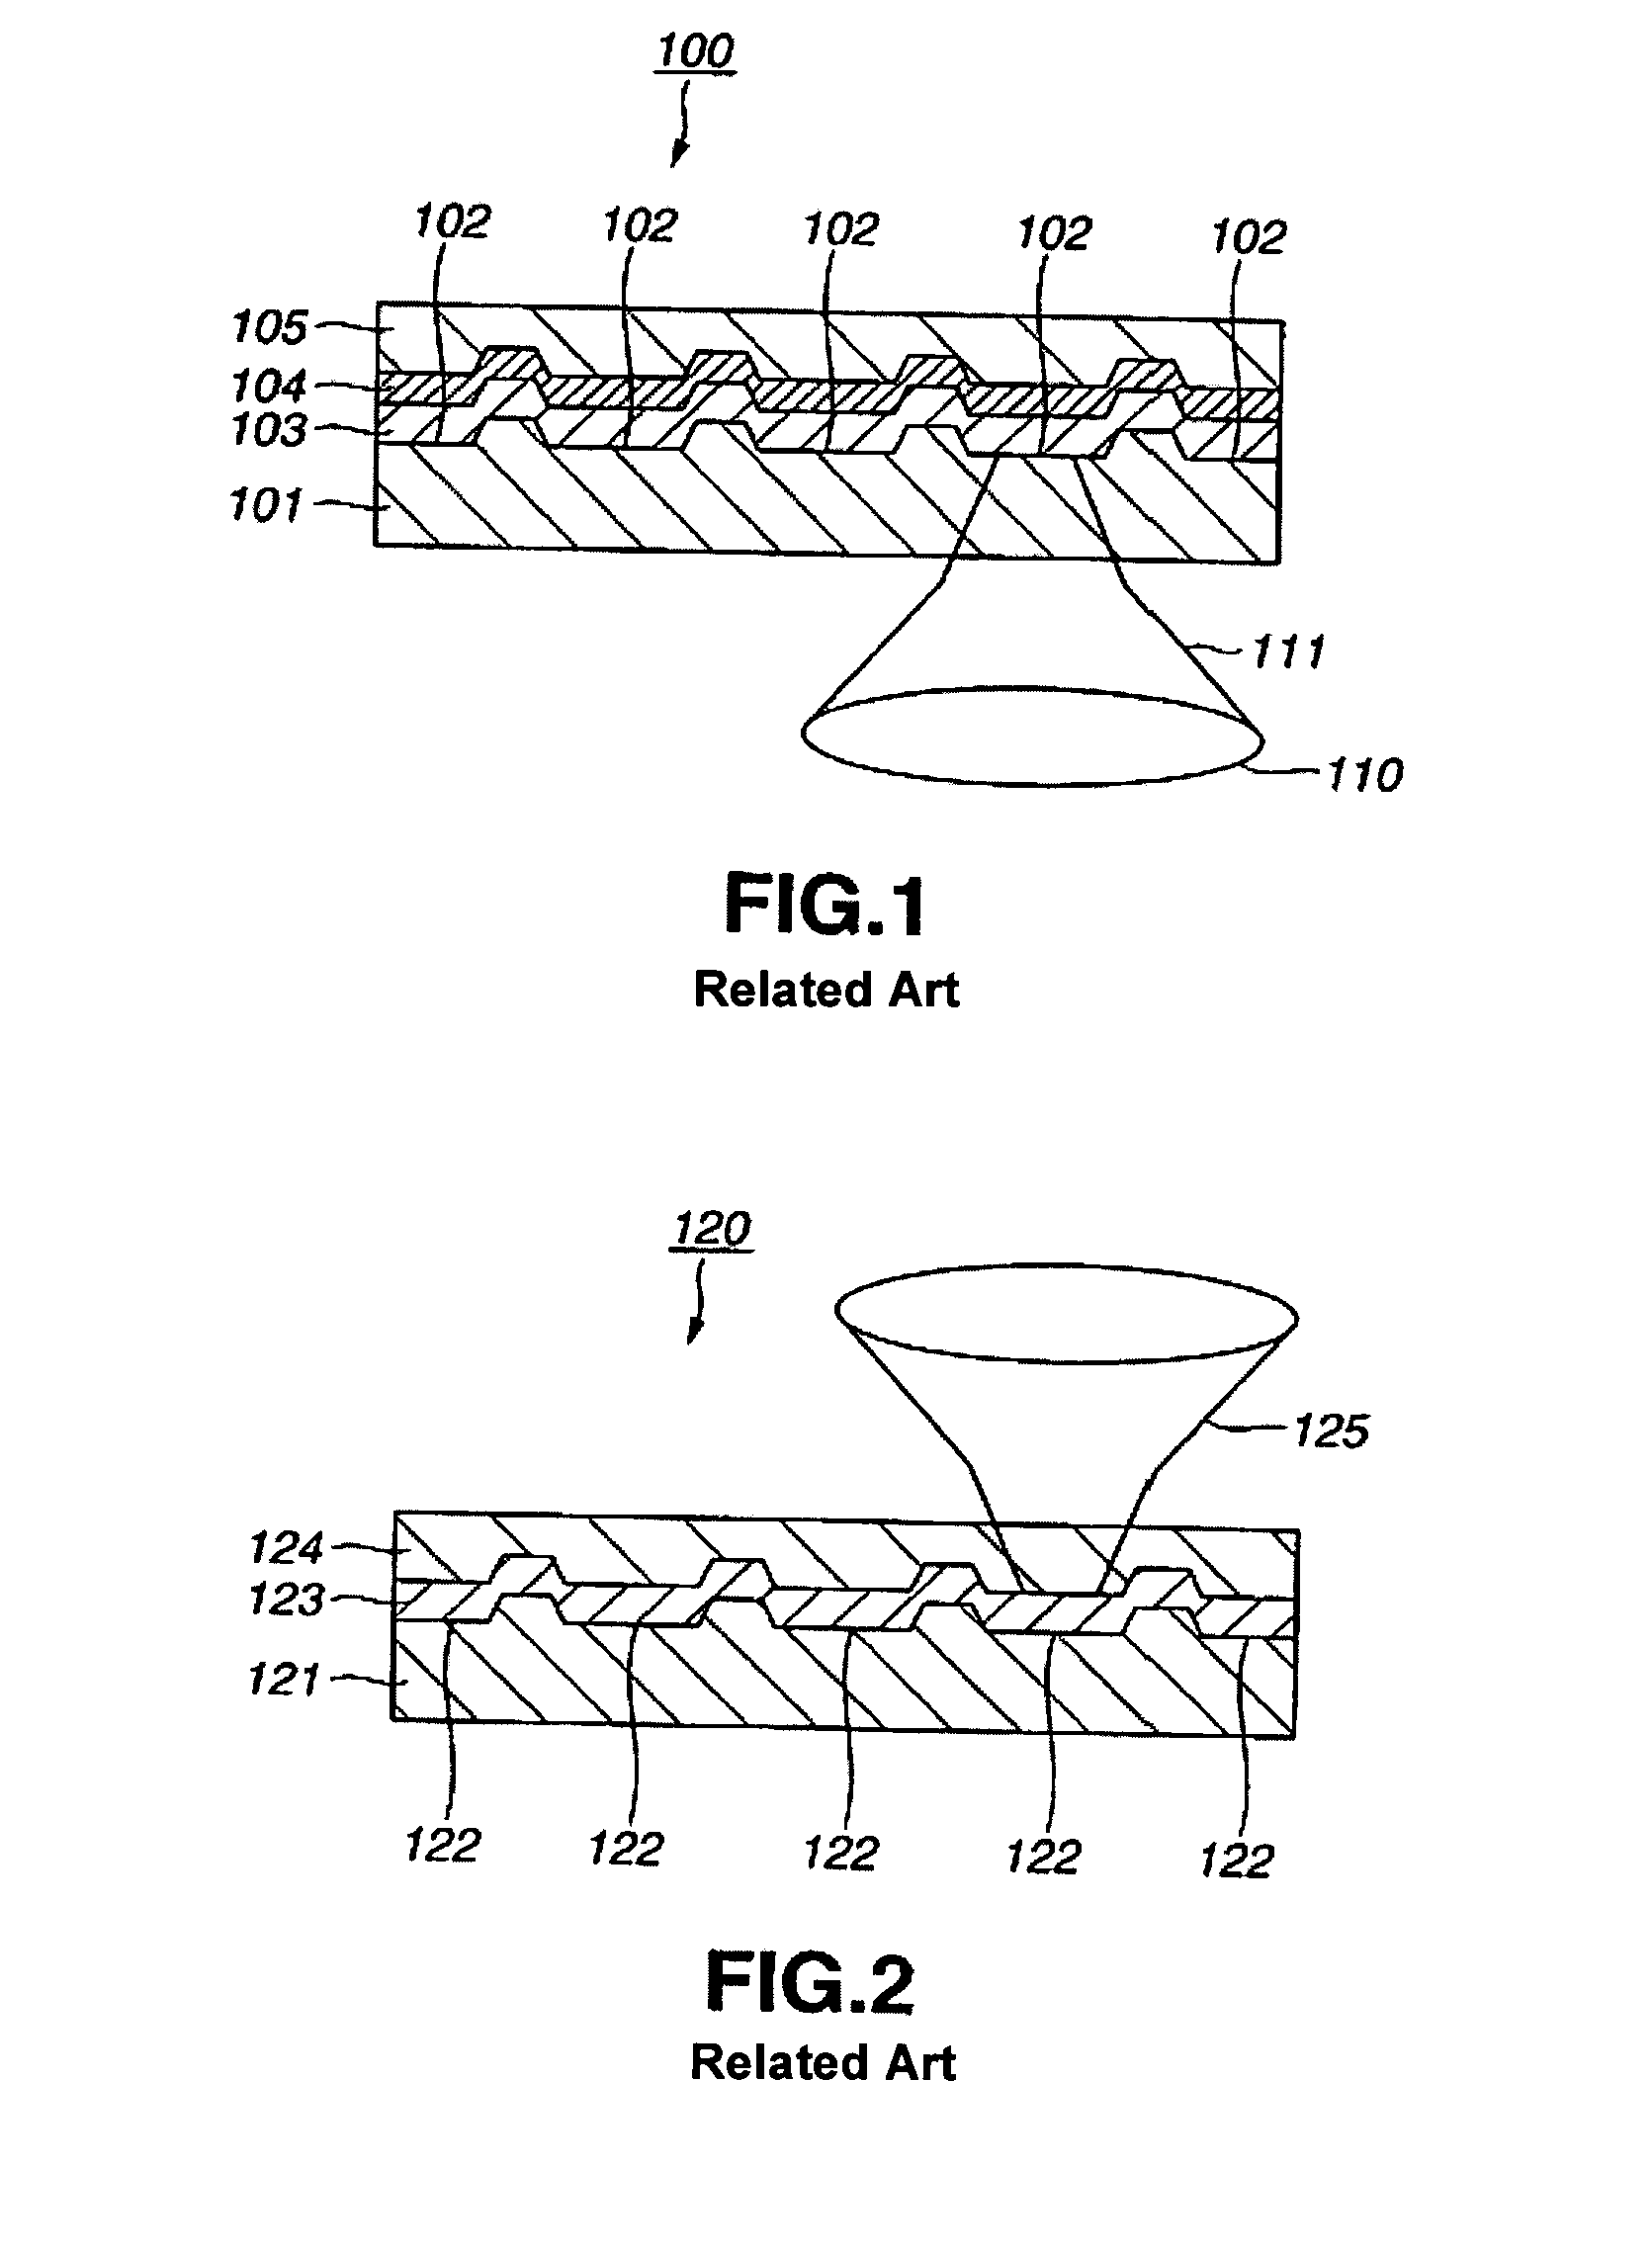 Optical storage medium having an organic recording layer attached to a dielectric layer